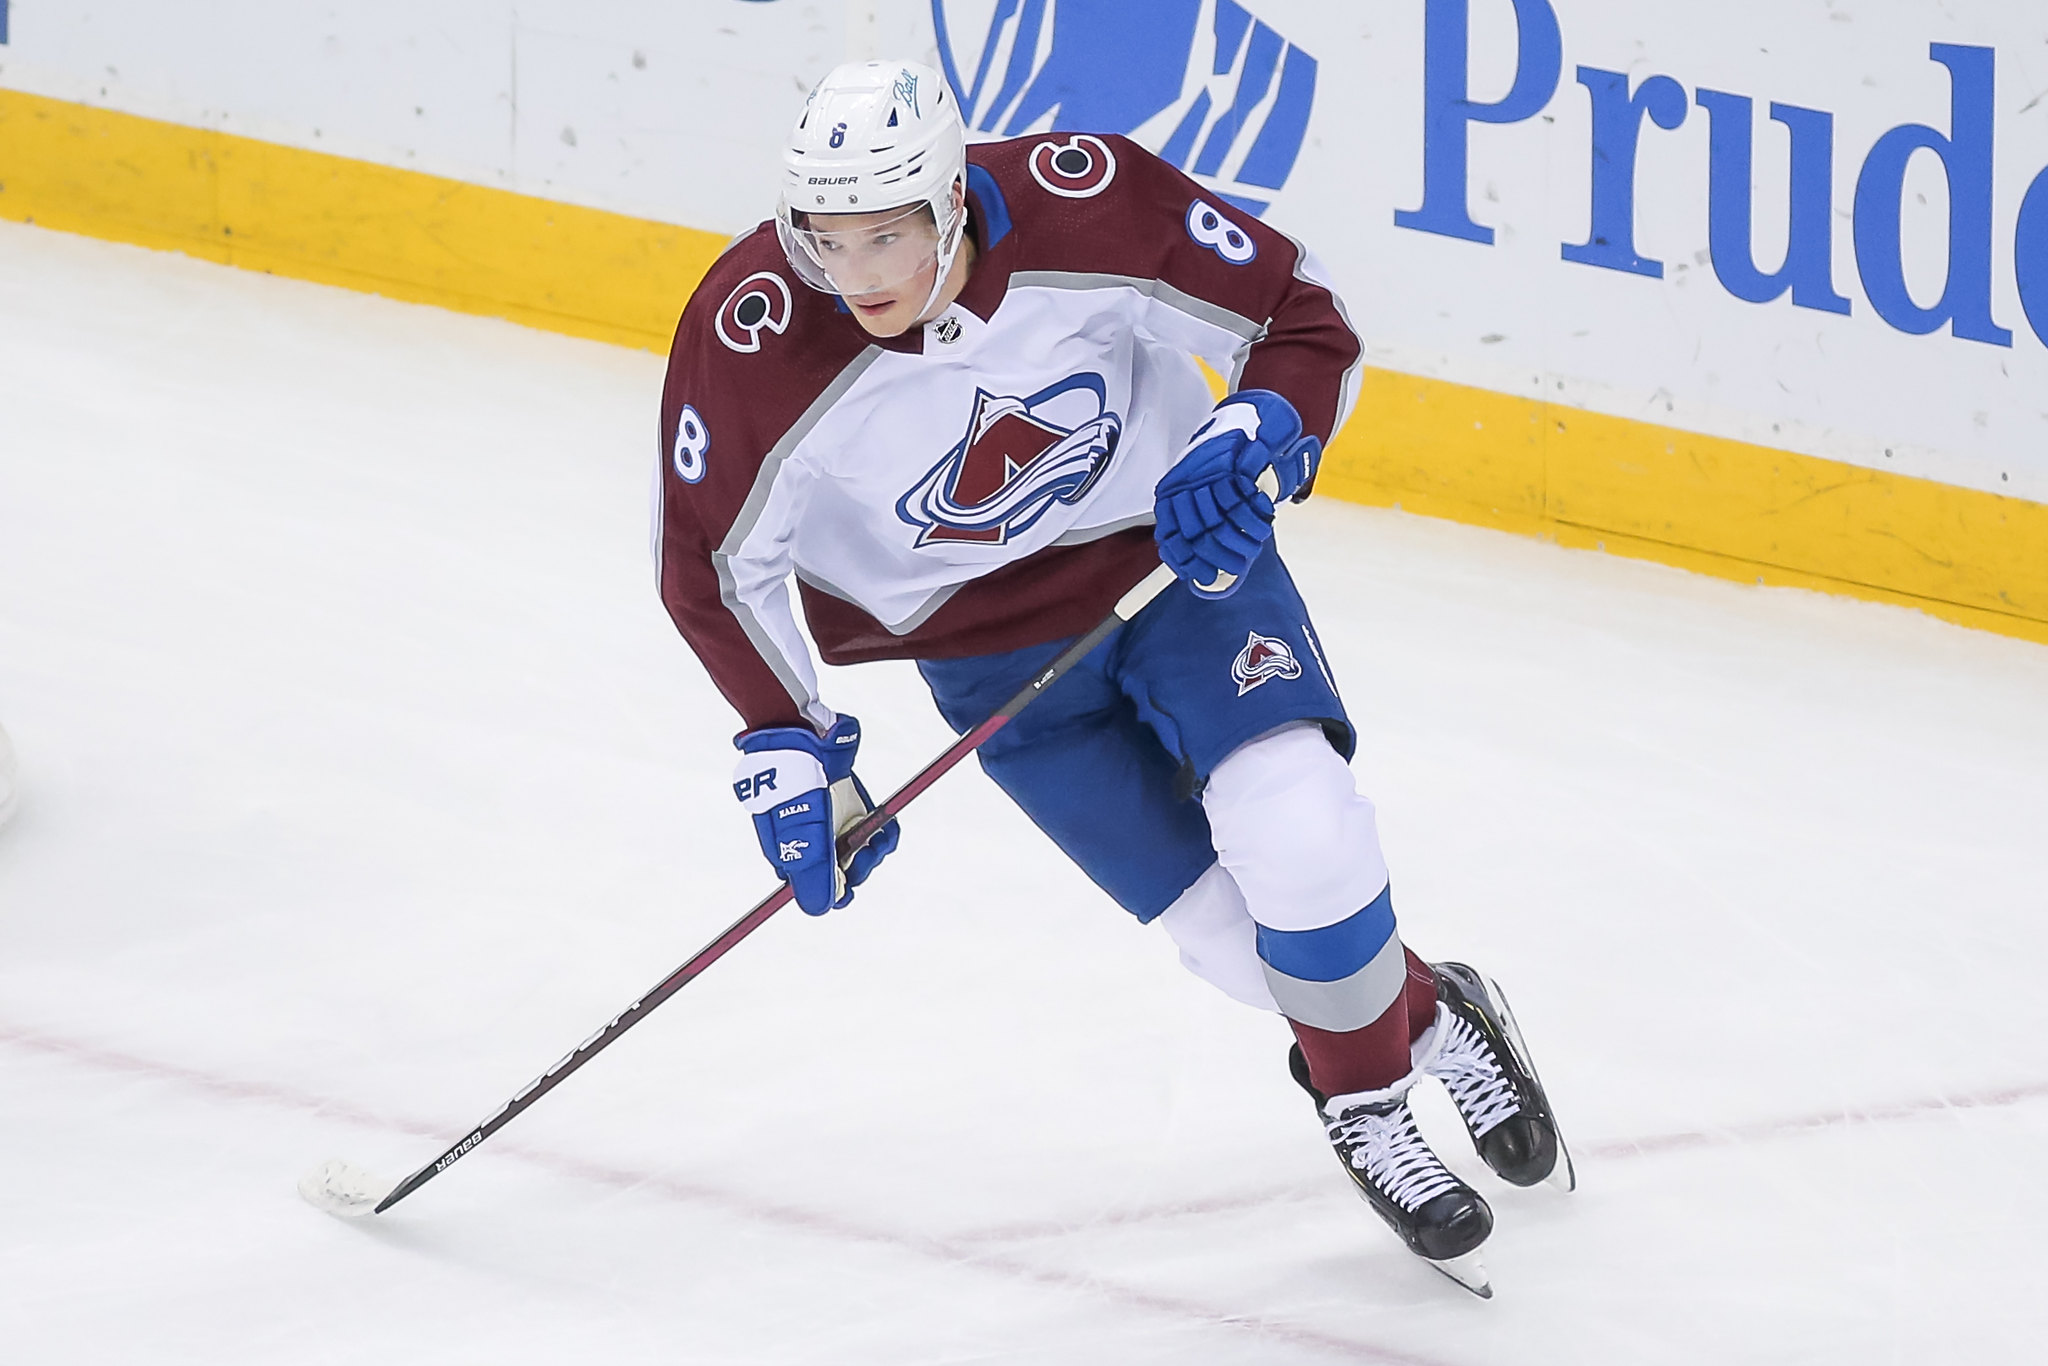 Avalanche's Makar suspended for Game 5 at home after interference on Kraken's  McCann